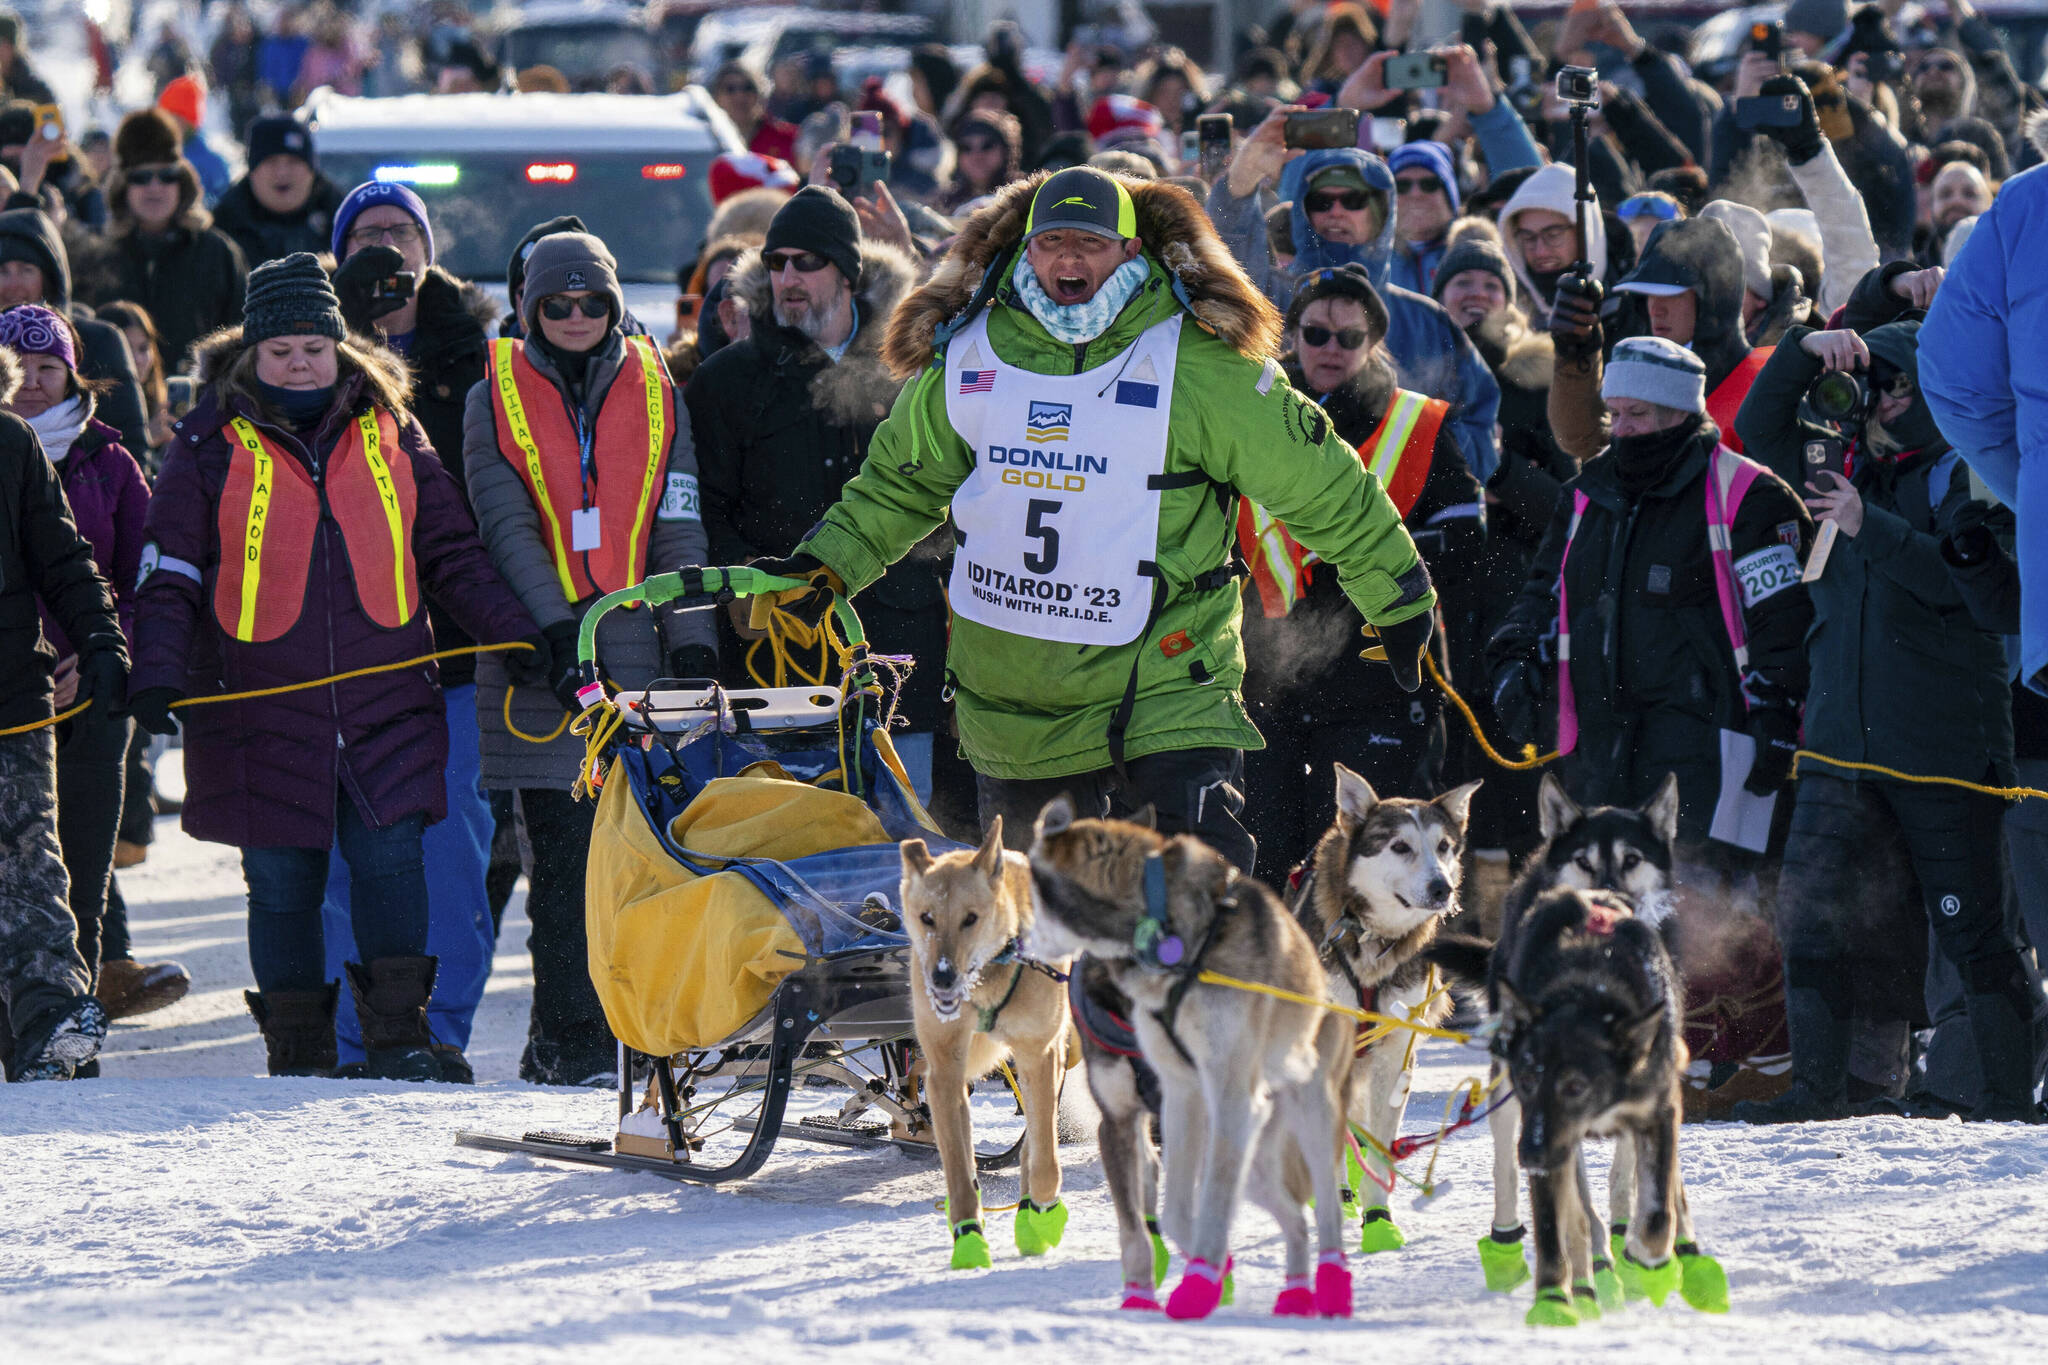 Ryan Redington mushes down Front Street to win the 2023 Iditarod Trail Sled Dog Race Tuesday, March 14, 2023 in Nome, Alaska. Redington, 40, is the grandson of Joe Redington Sr., who helped co-found the arduous race across Alaska that was first held in 1973 and is known as the “Father of the Iditarod.” (Loren Holmes/Anchorage Daily News via AP)